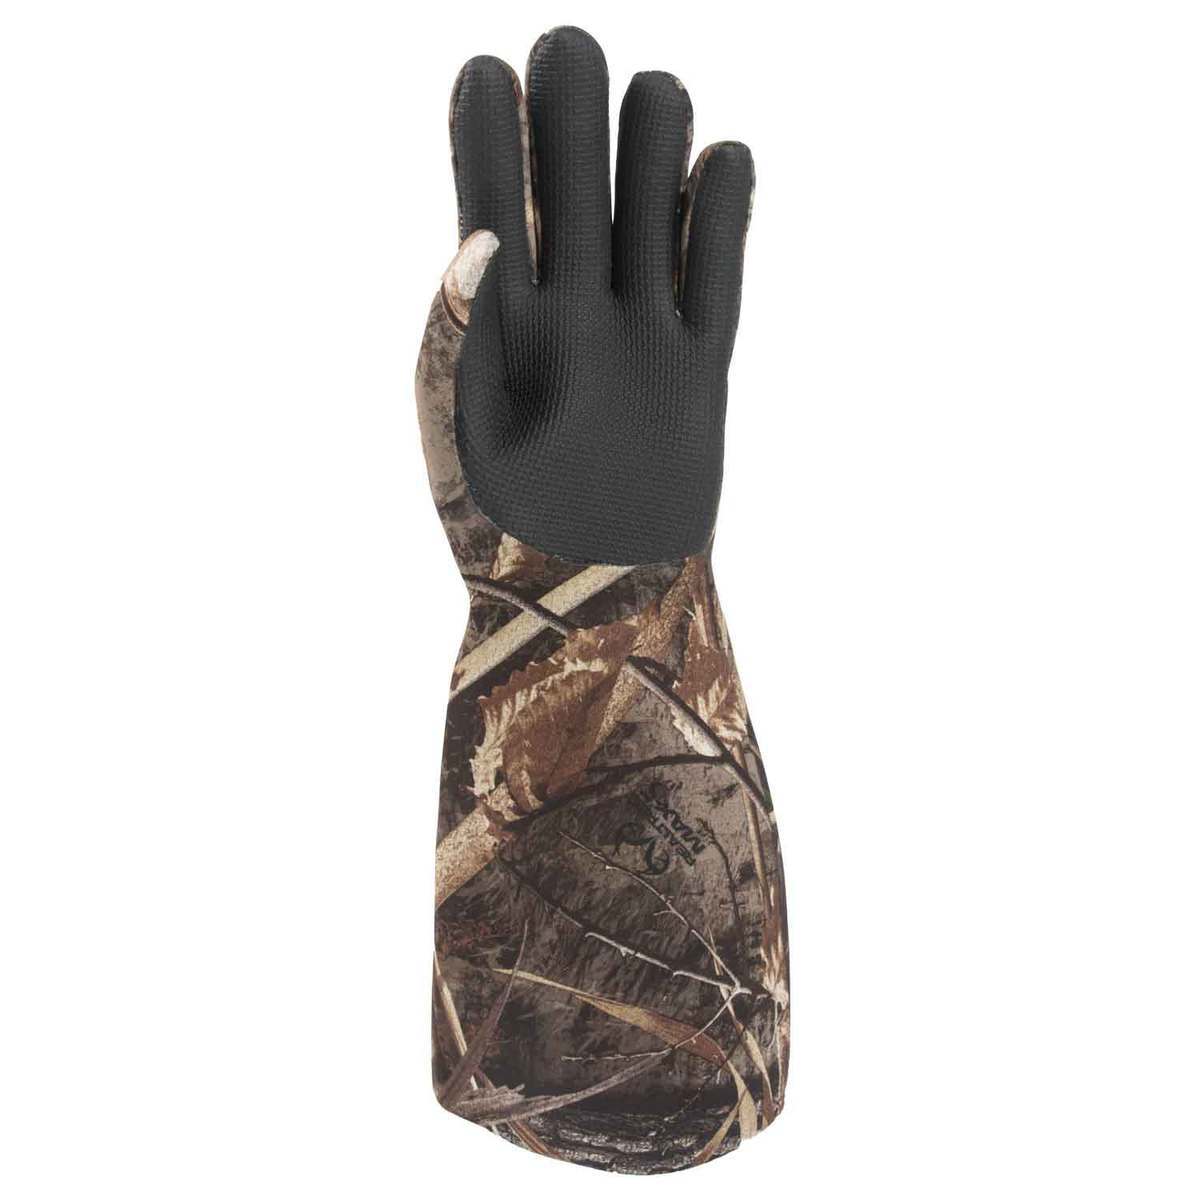 Need some new neoprene gloves for decoy retrieving, Page 3